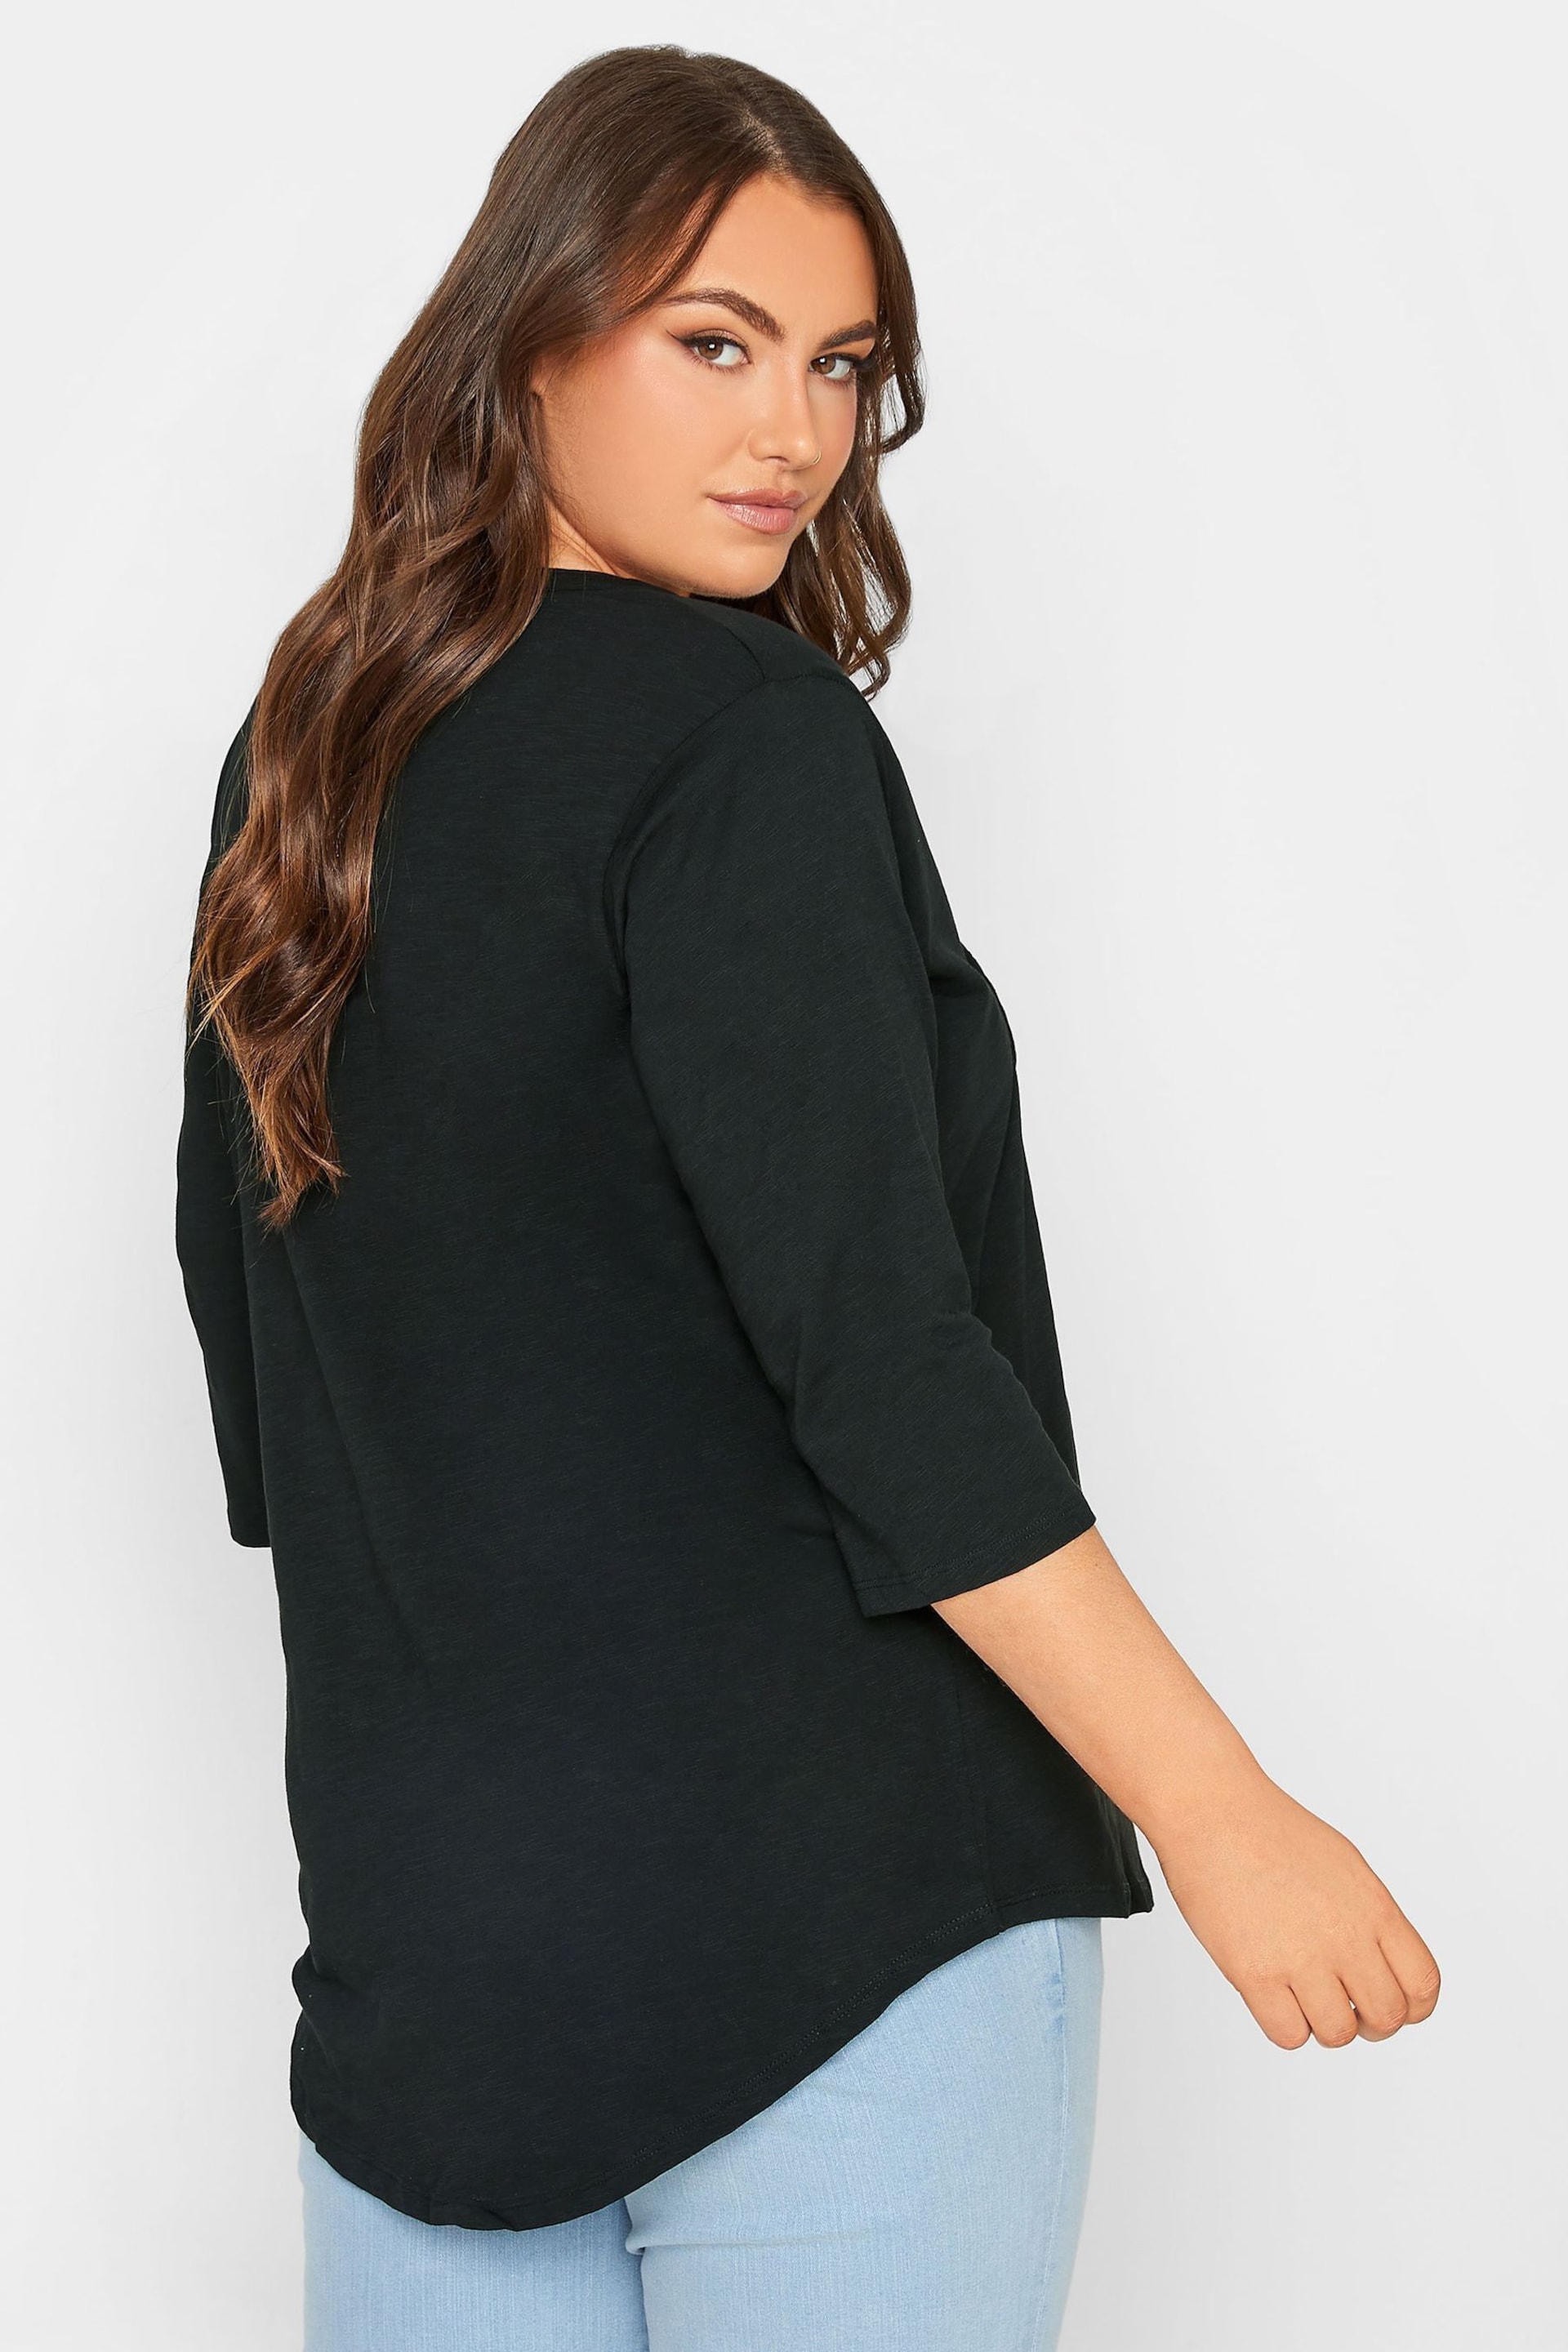 Yours Curve Black Pintuck Henley Top - Image 3 of 4